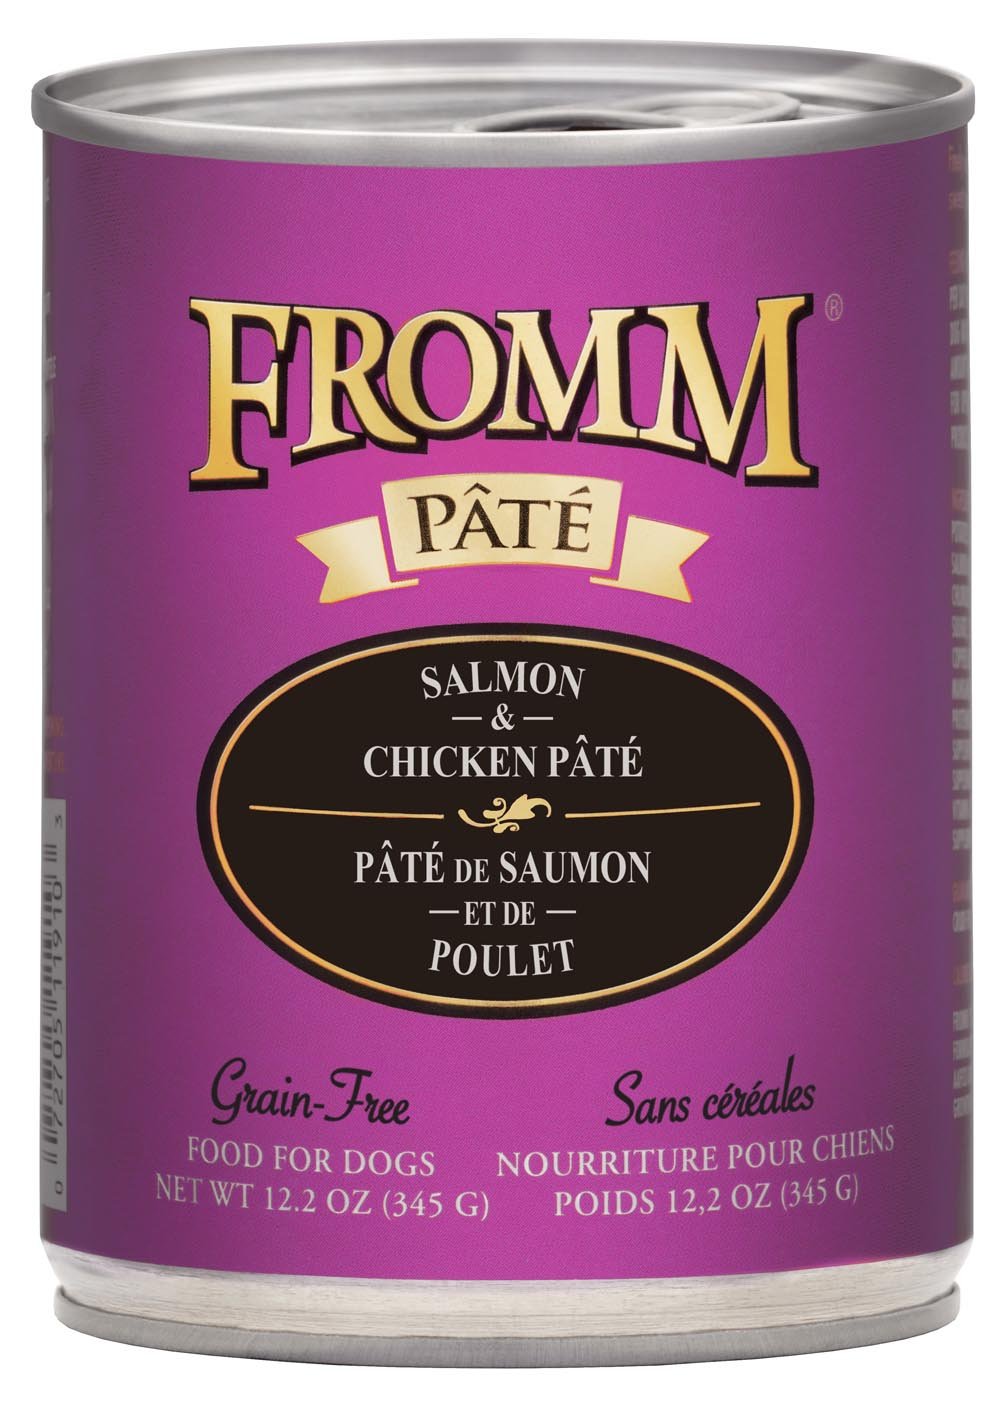 Fromm Gold Dog Salmon/Chkn Pate' 12.2